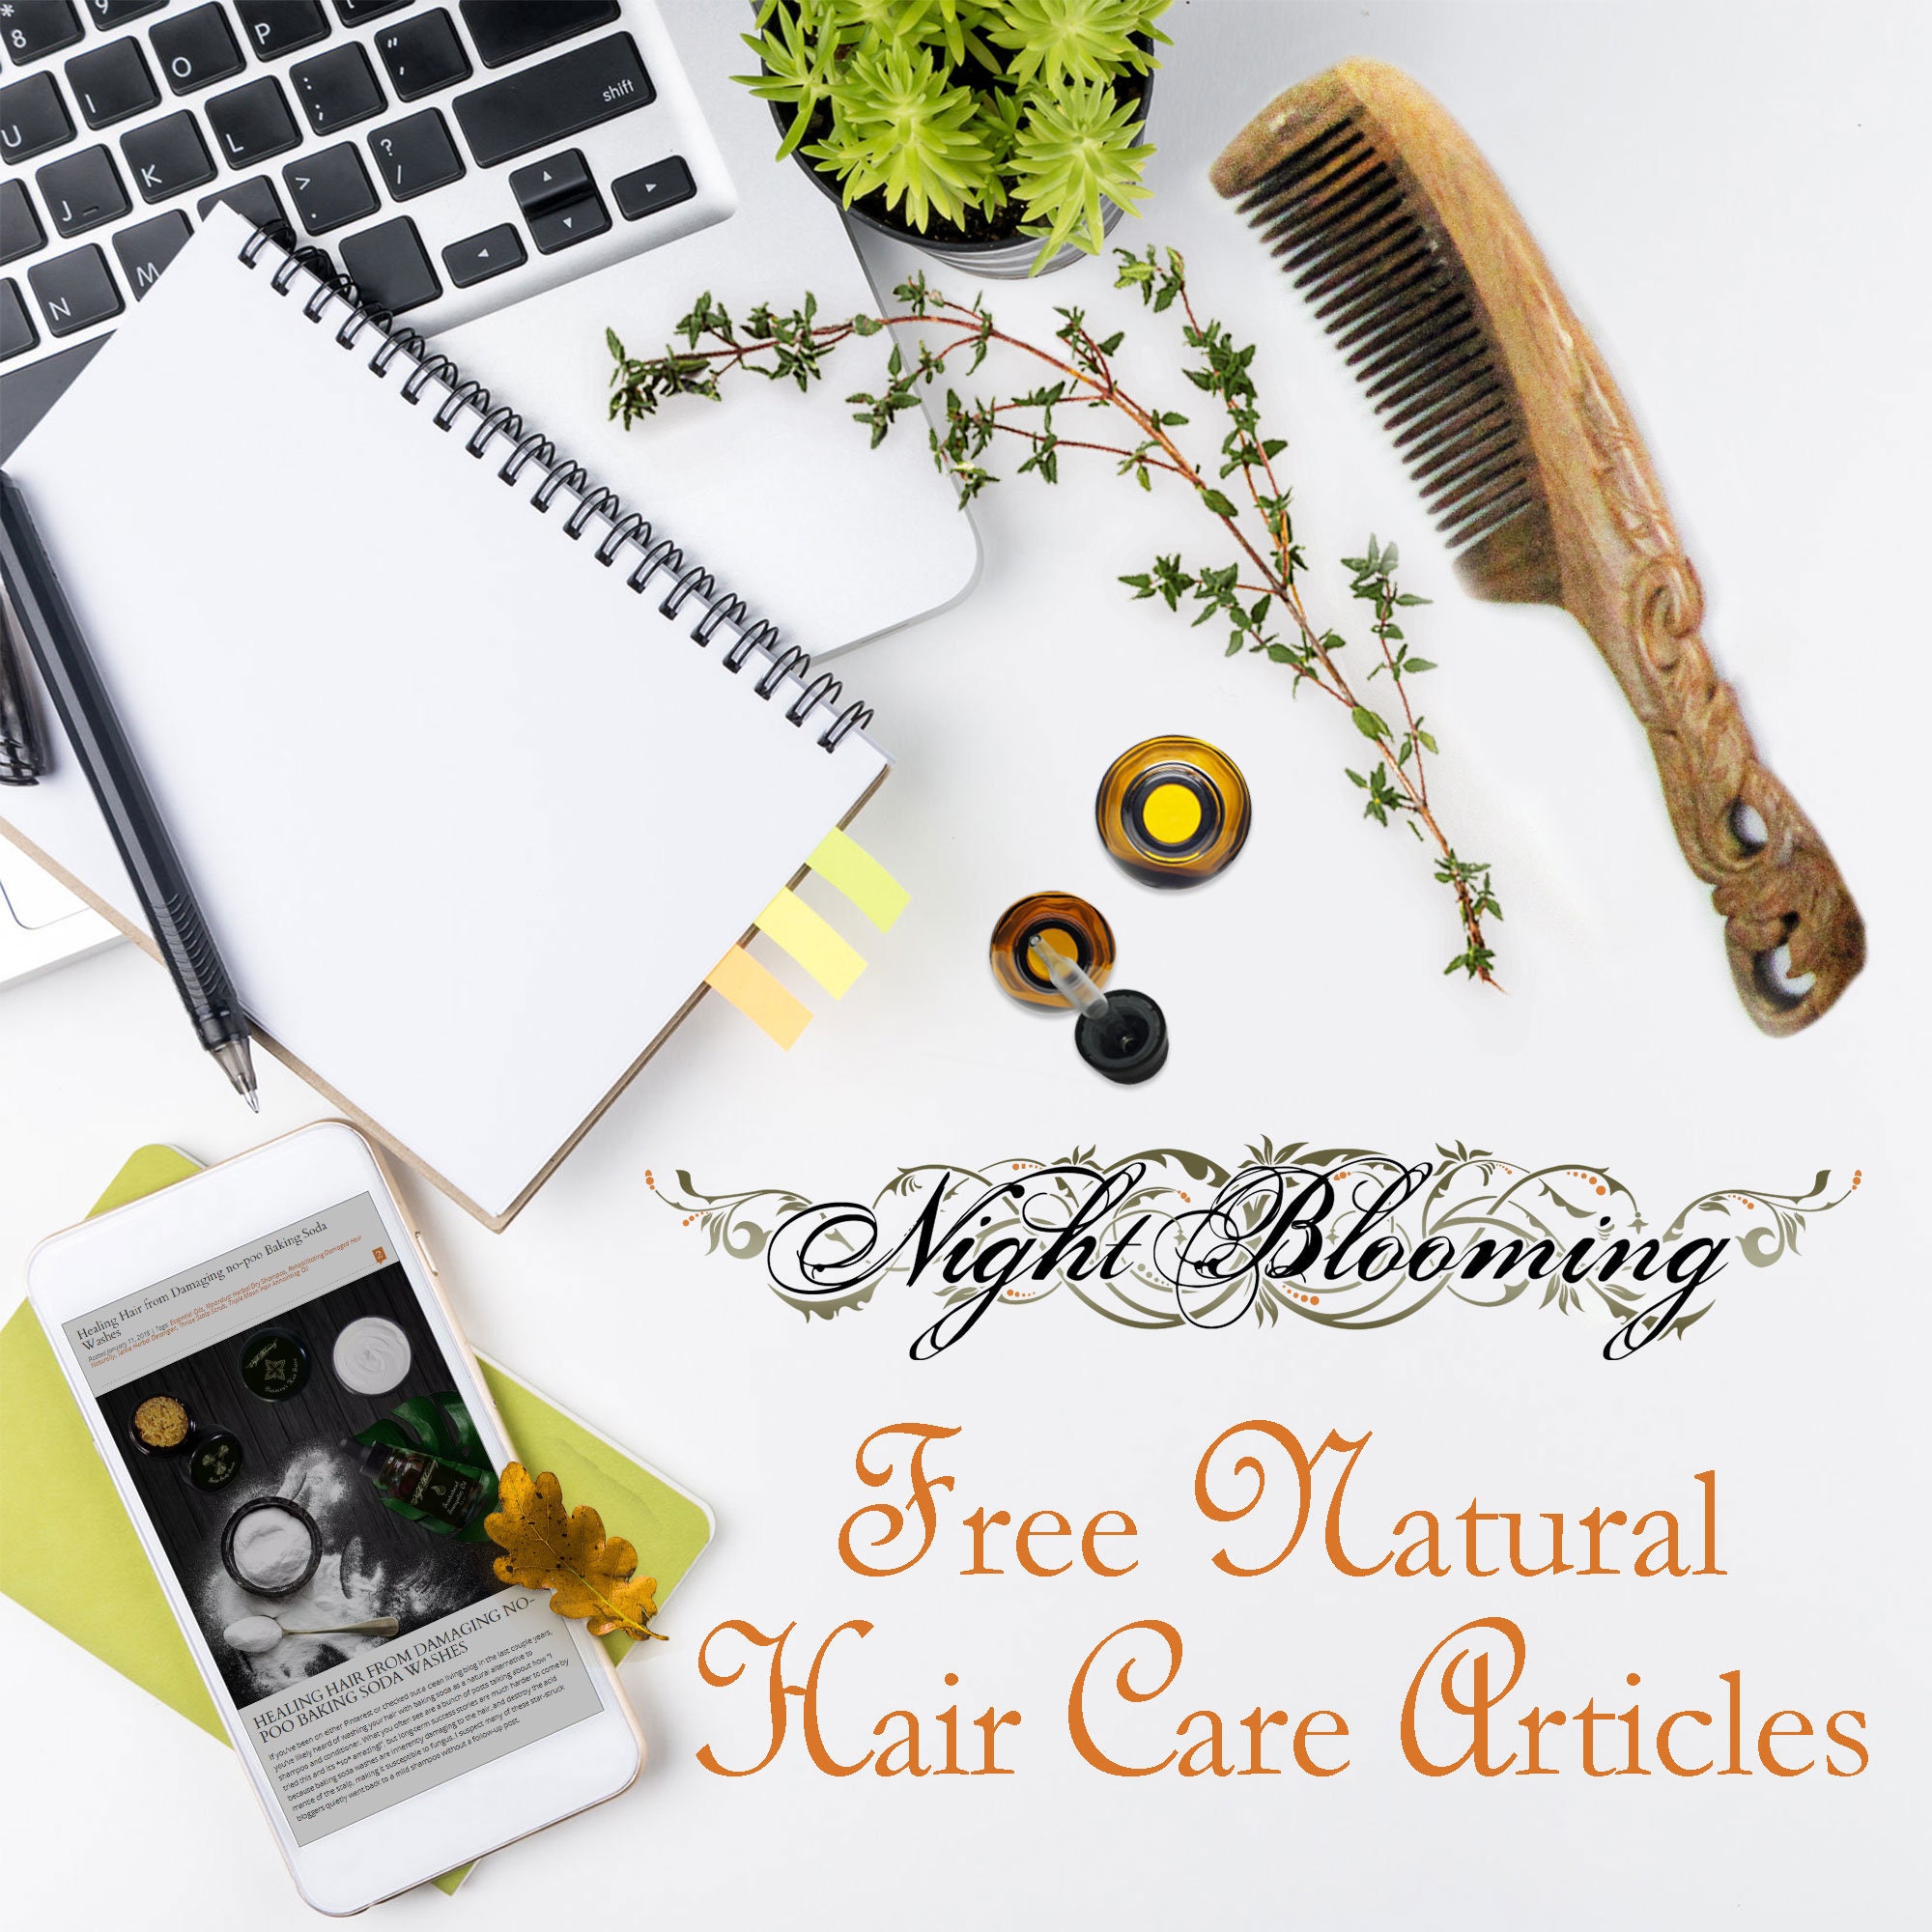 FREE Natural Hair Care Articles by Author and Herbal - Etsy